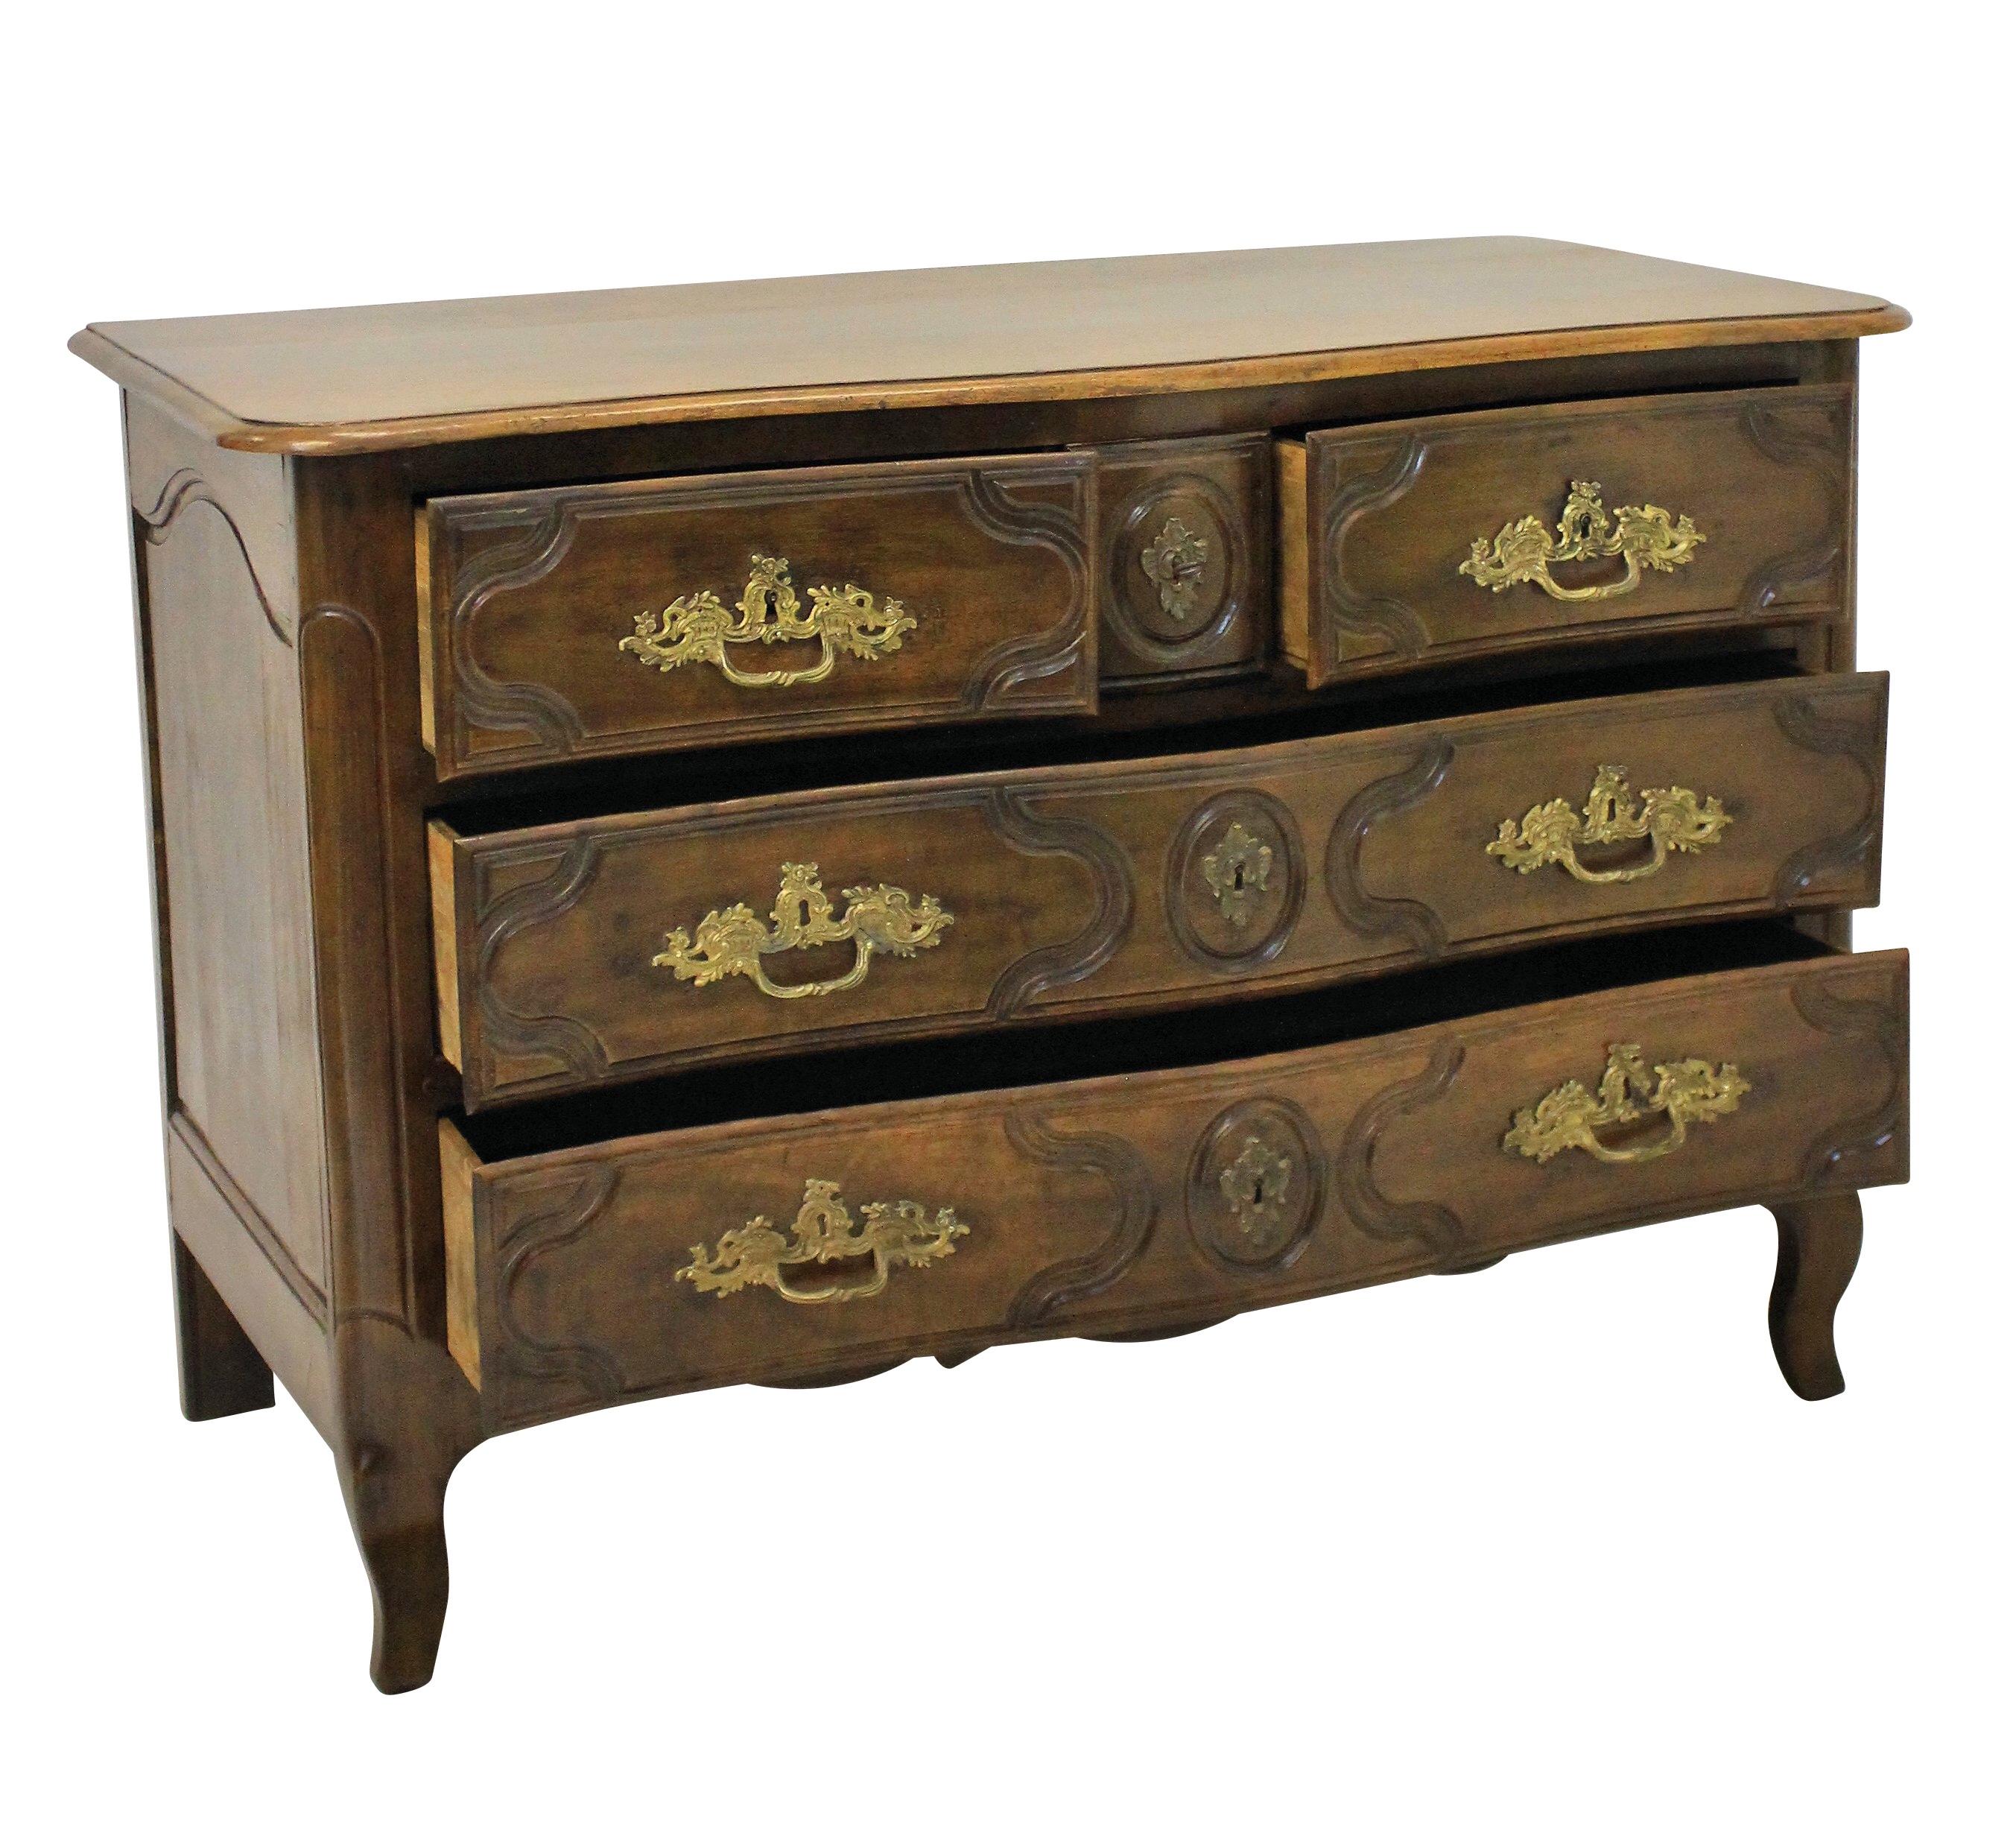 An 18th century French Provincial walnut commode, with serpentine front and five drawers. The original handles in gilt bronze, overall with a great patina.

 